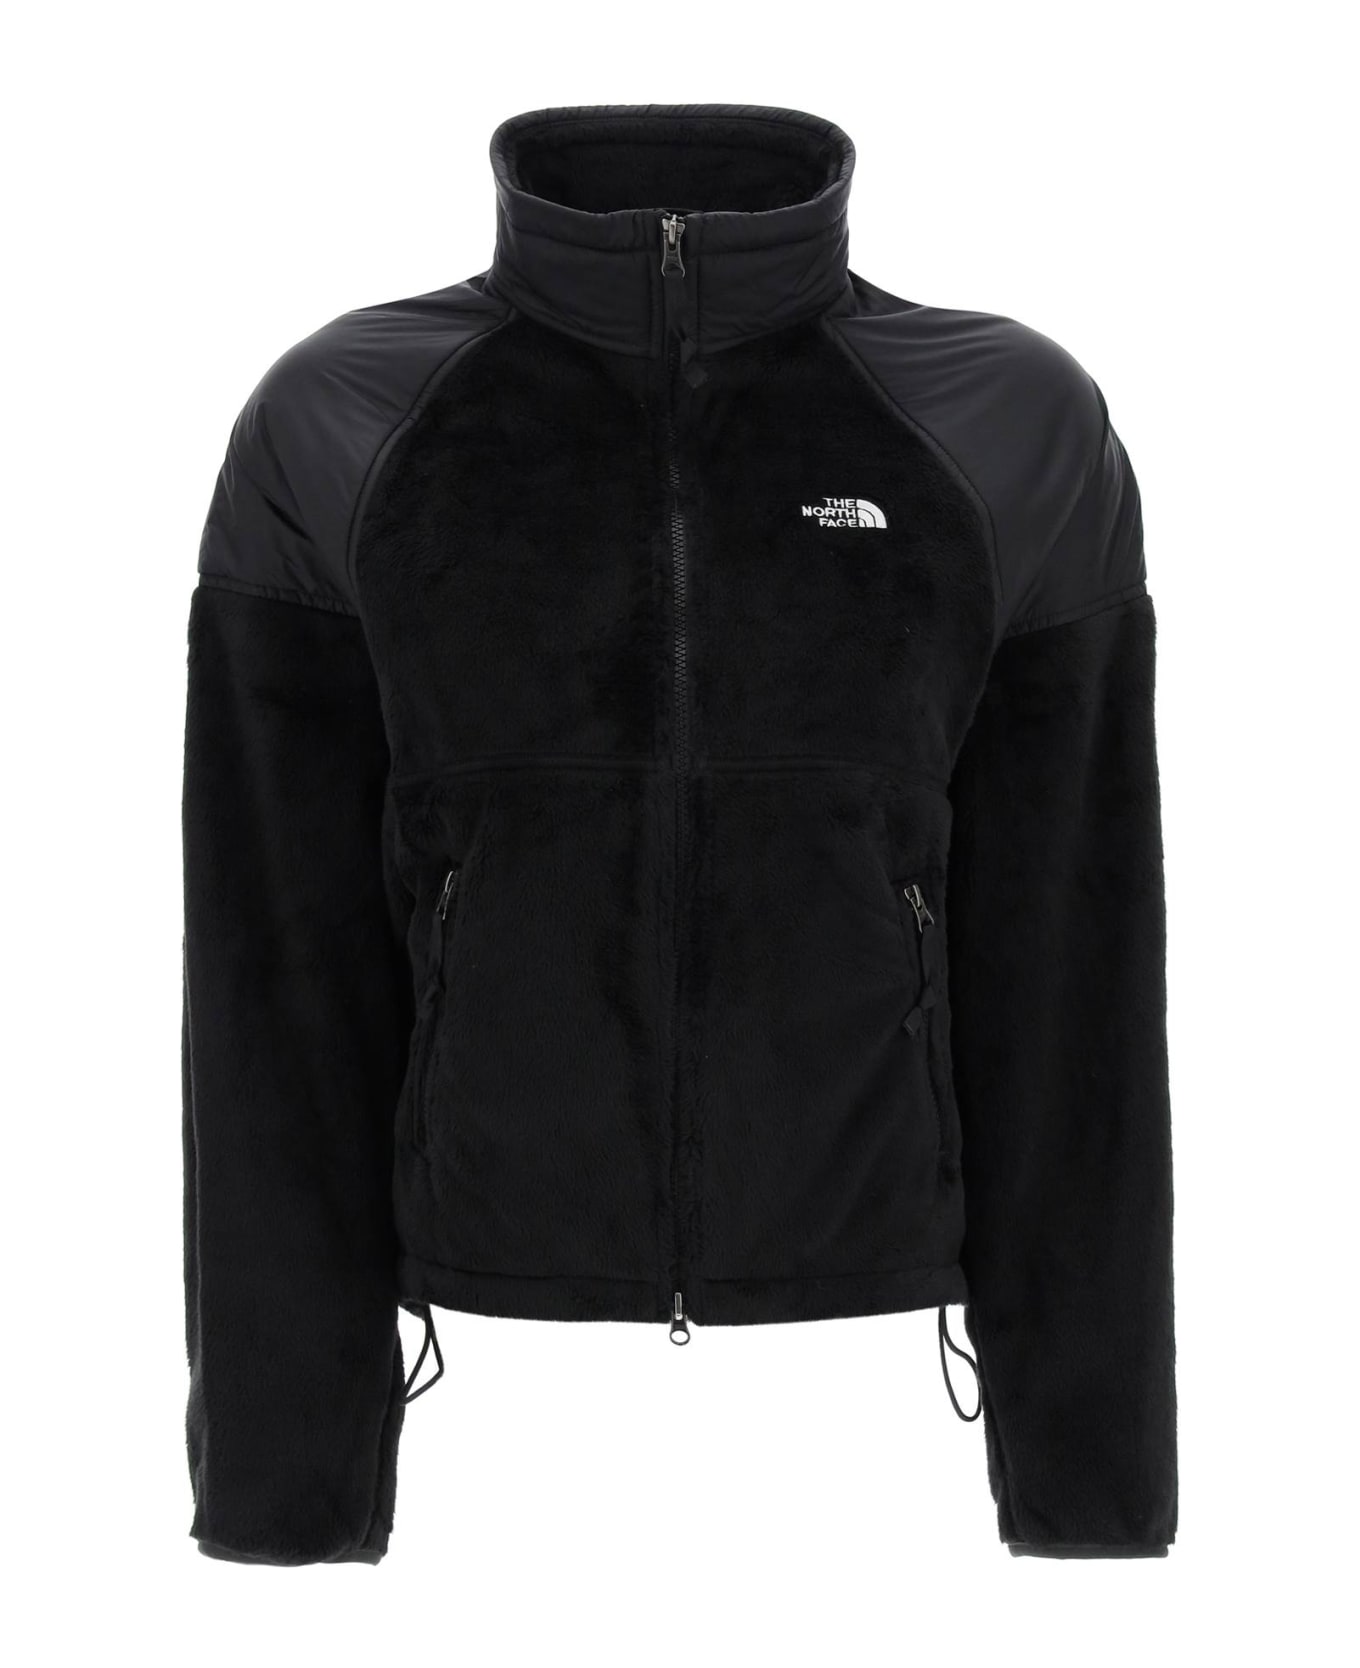 The North Face Versa Velour Jacket In Recycled Fleece And Risptop - TNF BLACK (Black)